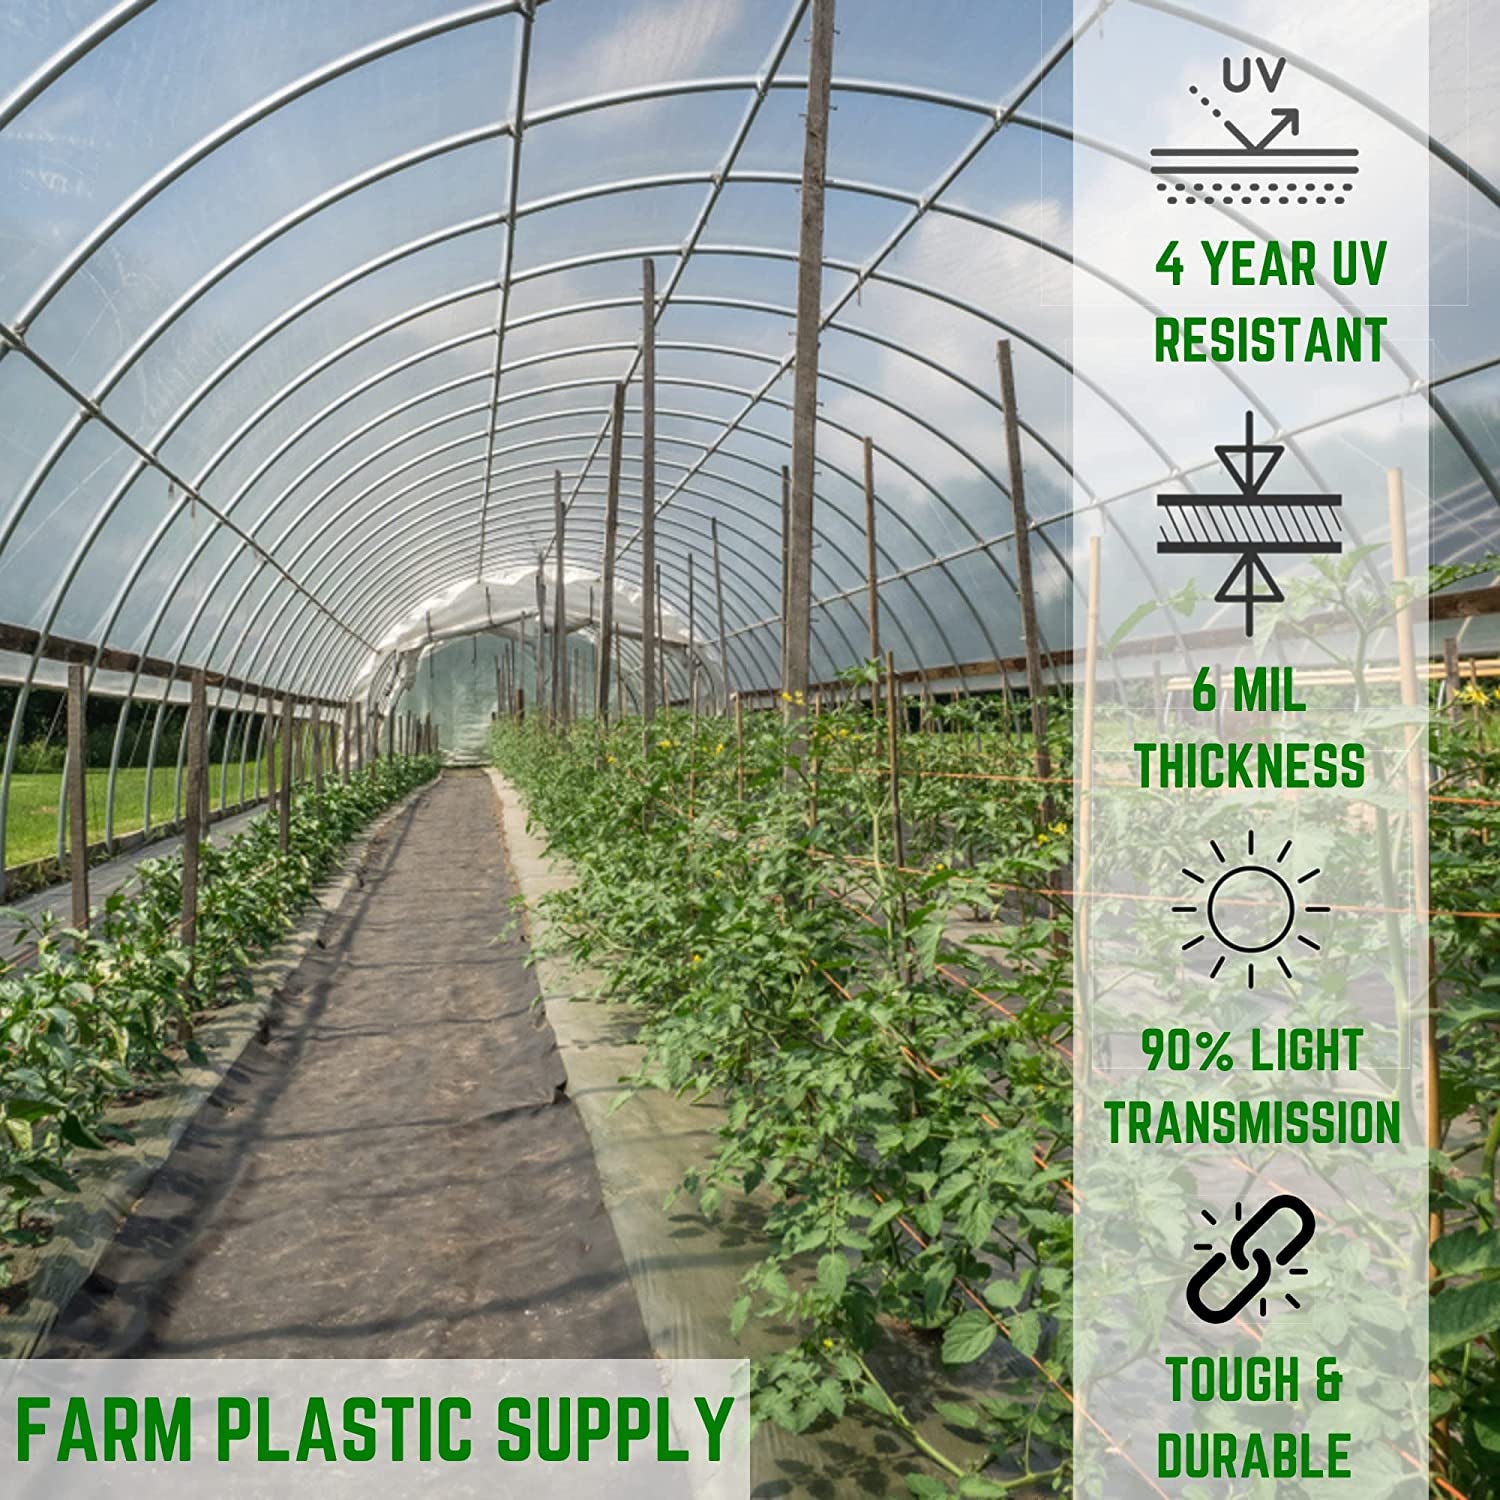 - Clear Greenhouse Plastic Sheeting - 6 Mil - (25' X 40') - 4 Year UV Resistant Polyethylene Greenhouse Film, Hoop House Green House Cover for Gardening, Farming, Agriculture